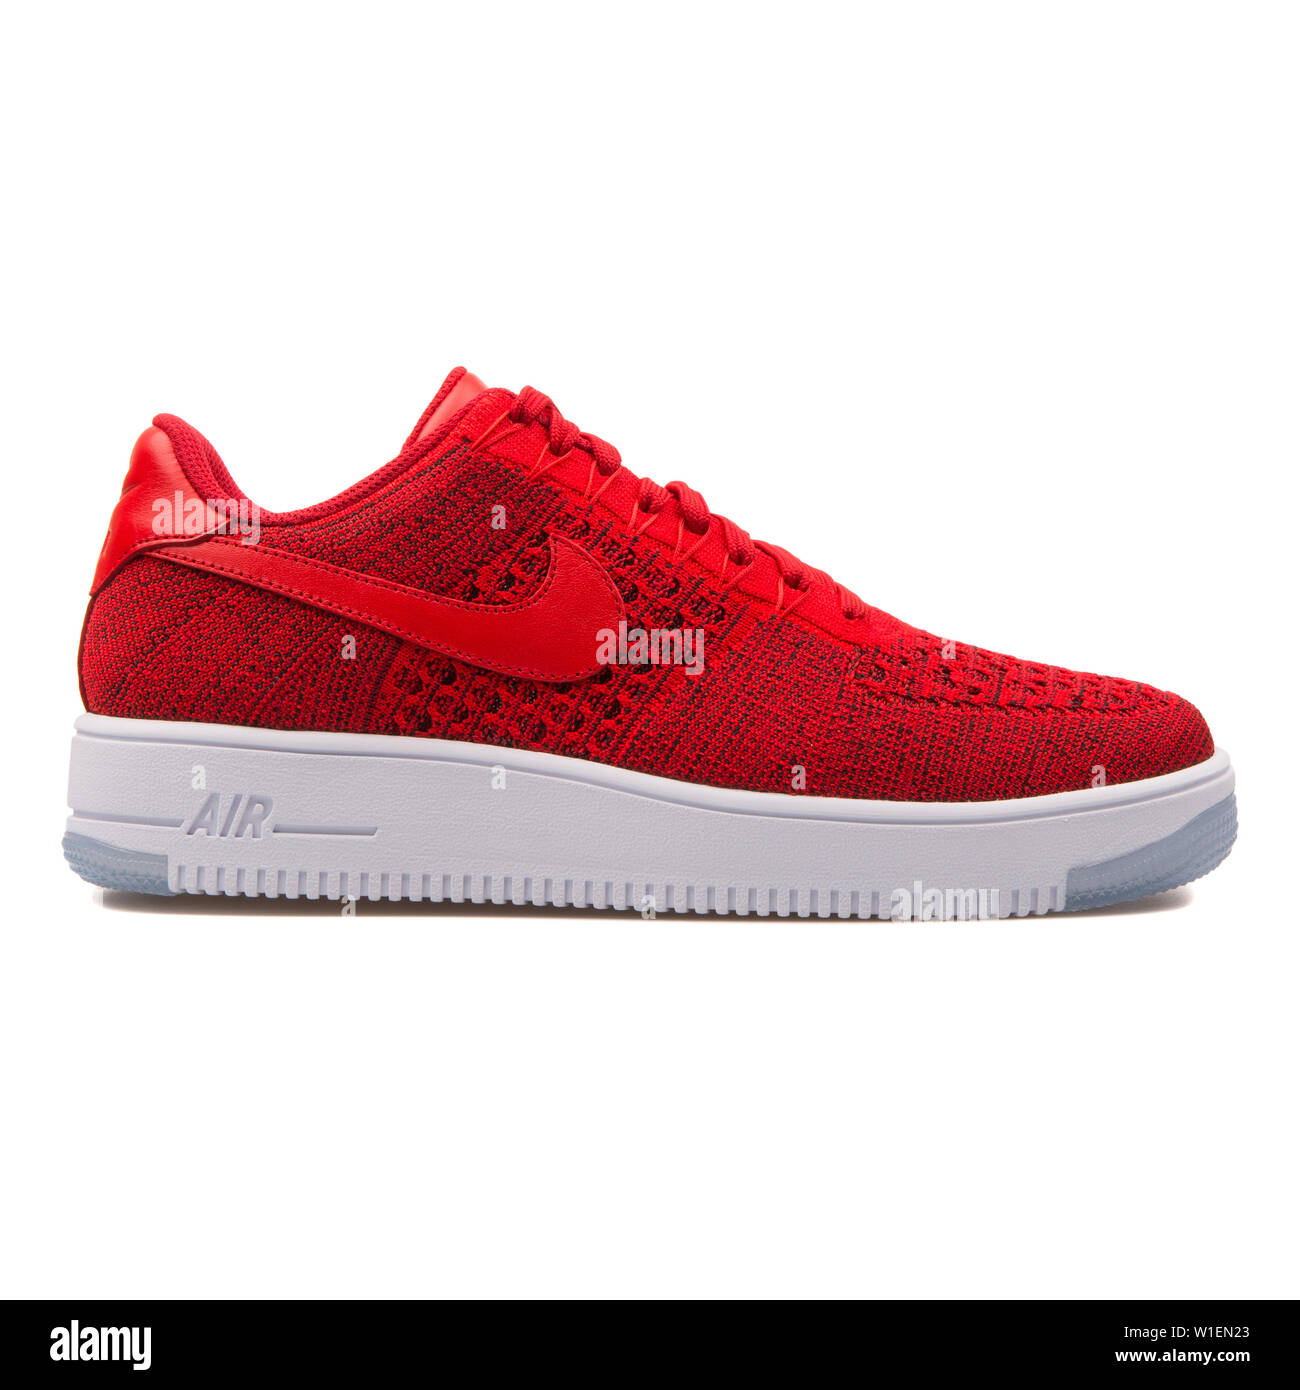 VIENNA, AUSTRIA - AUGUST 30, 2017: Nike Air Force 1 Ultra Flyknit Low red  sneaker on white background Stock Photo - Alamy